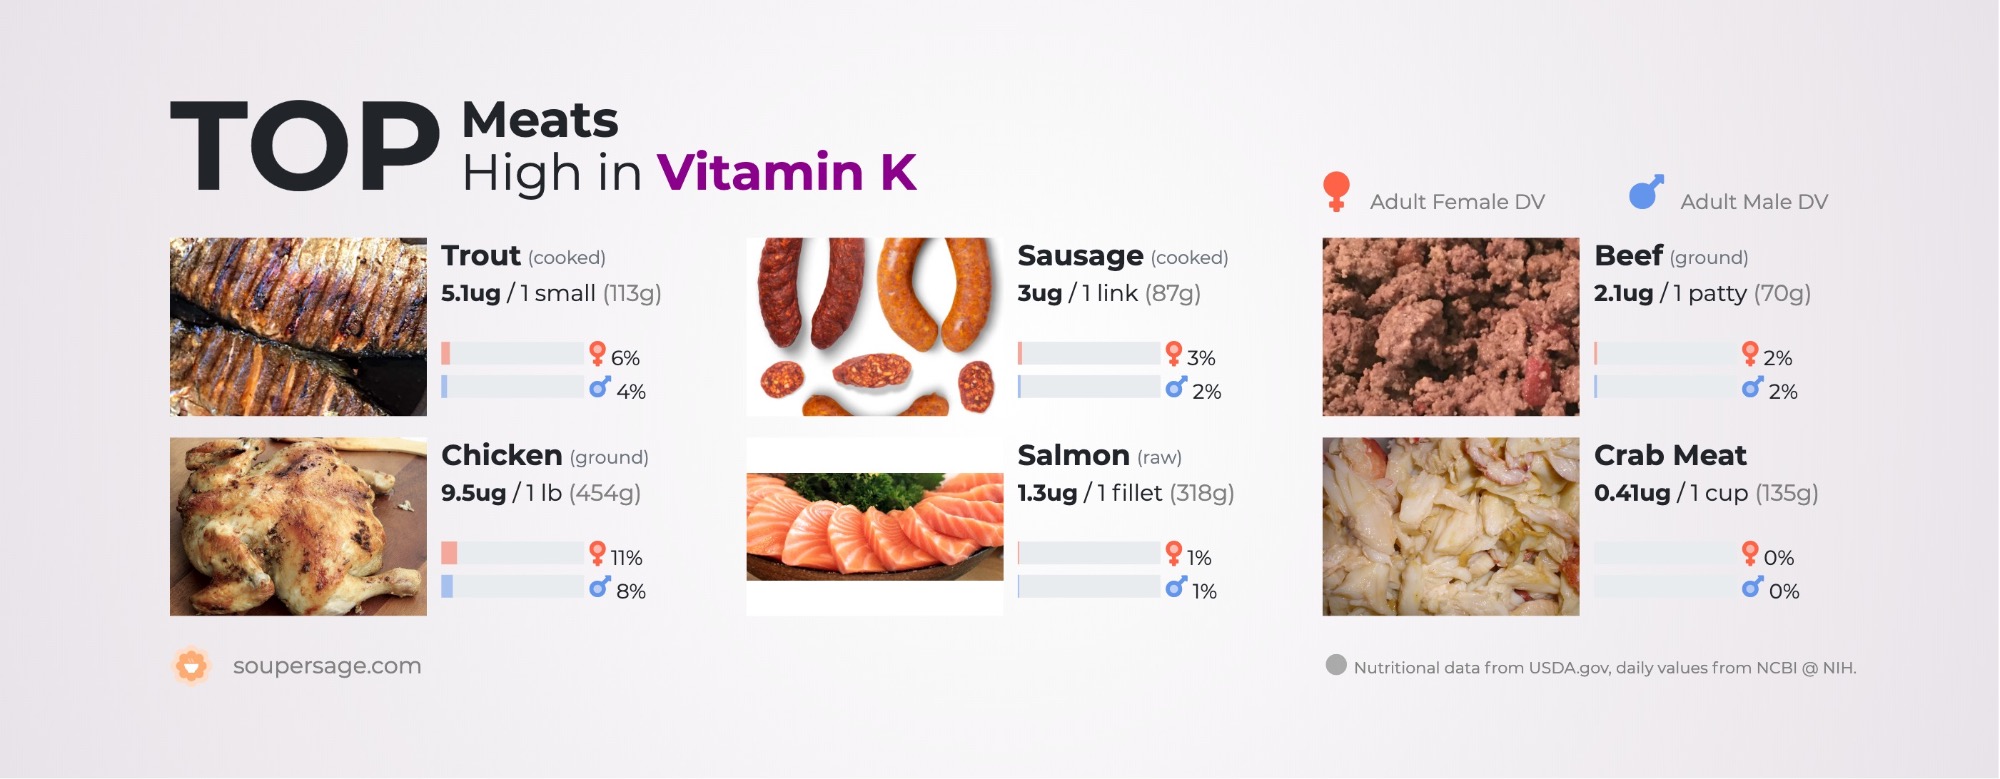 image of Top Meats High in Vitamin K